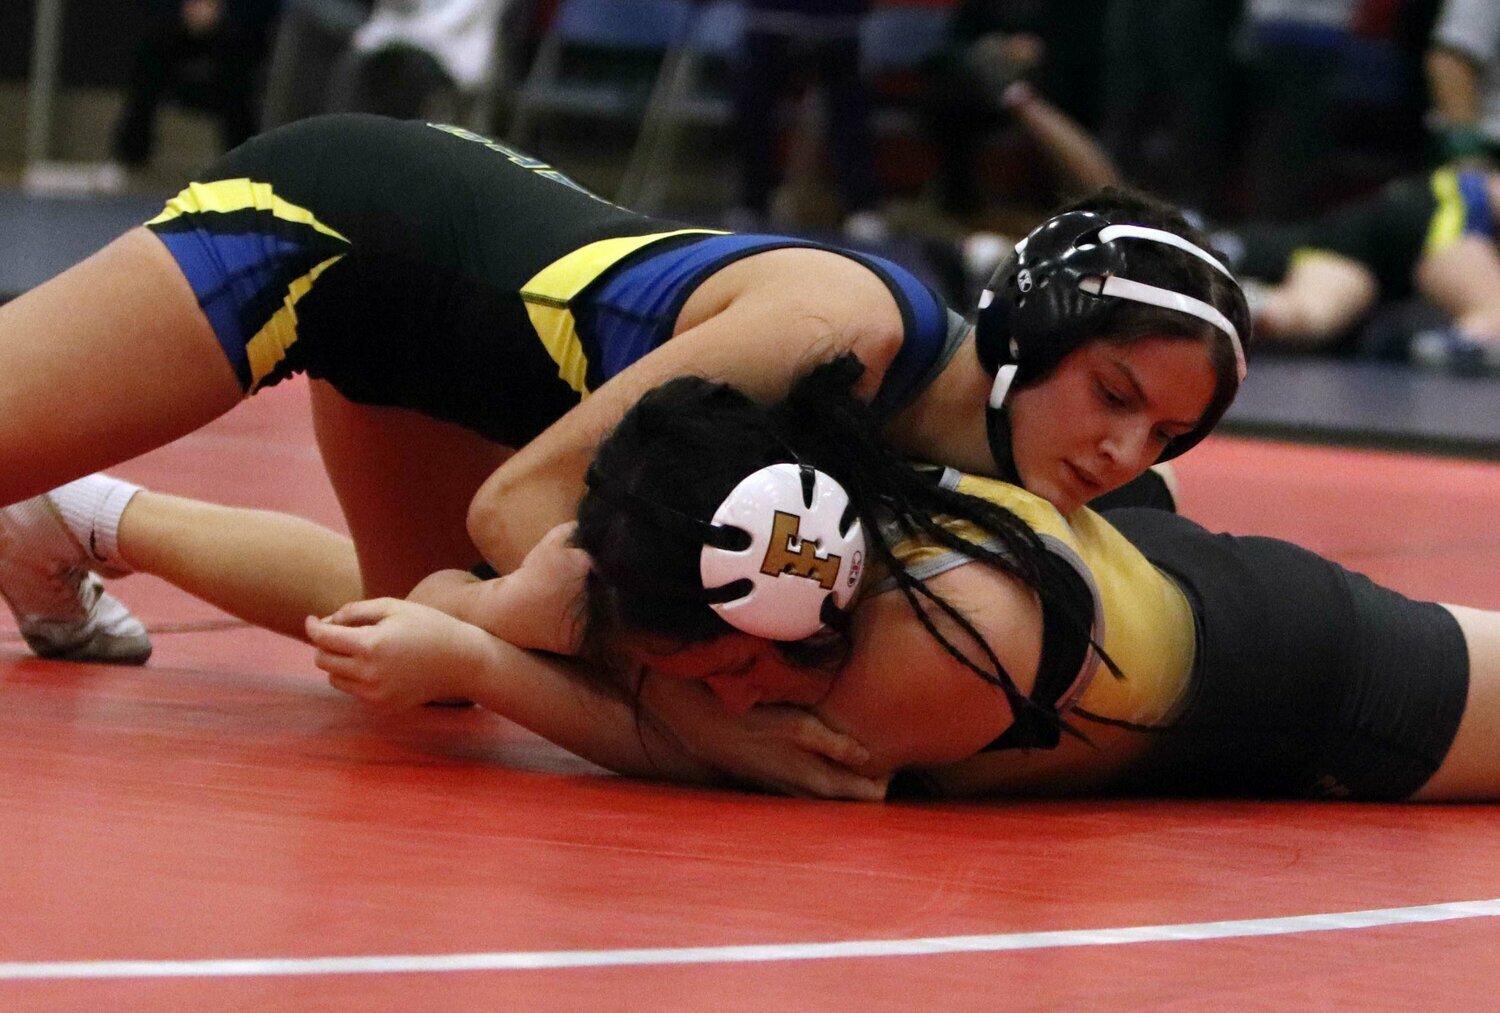 Wright City senior Elizabeth Riggs (top) prepares to pin Isabella Horn of Festus during their match earlier this season.